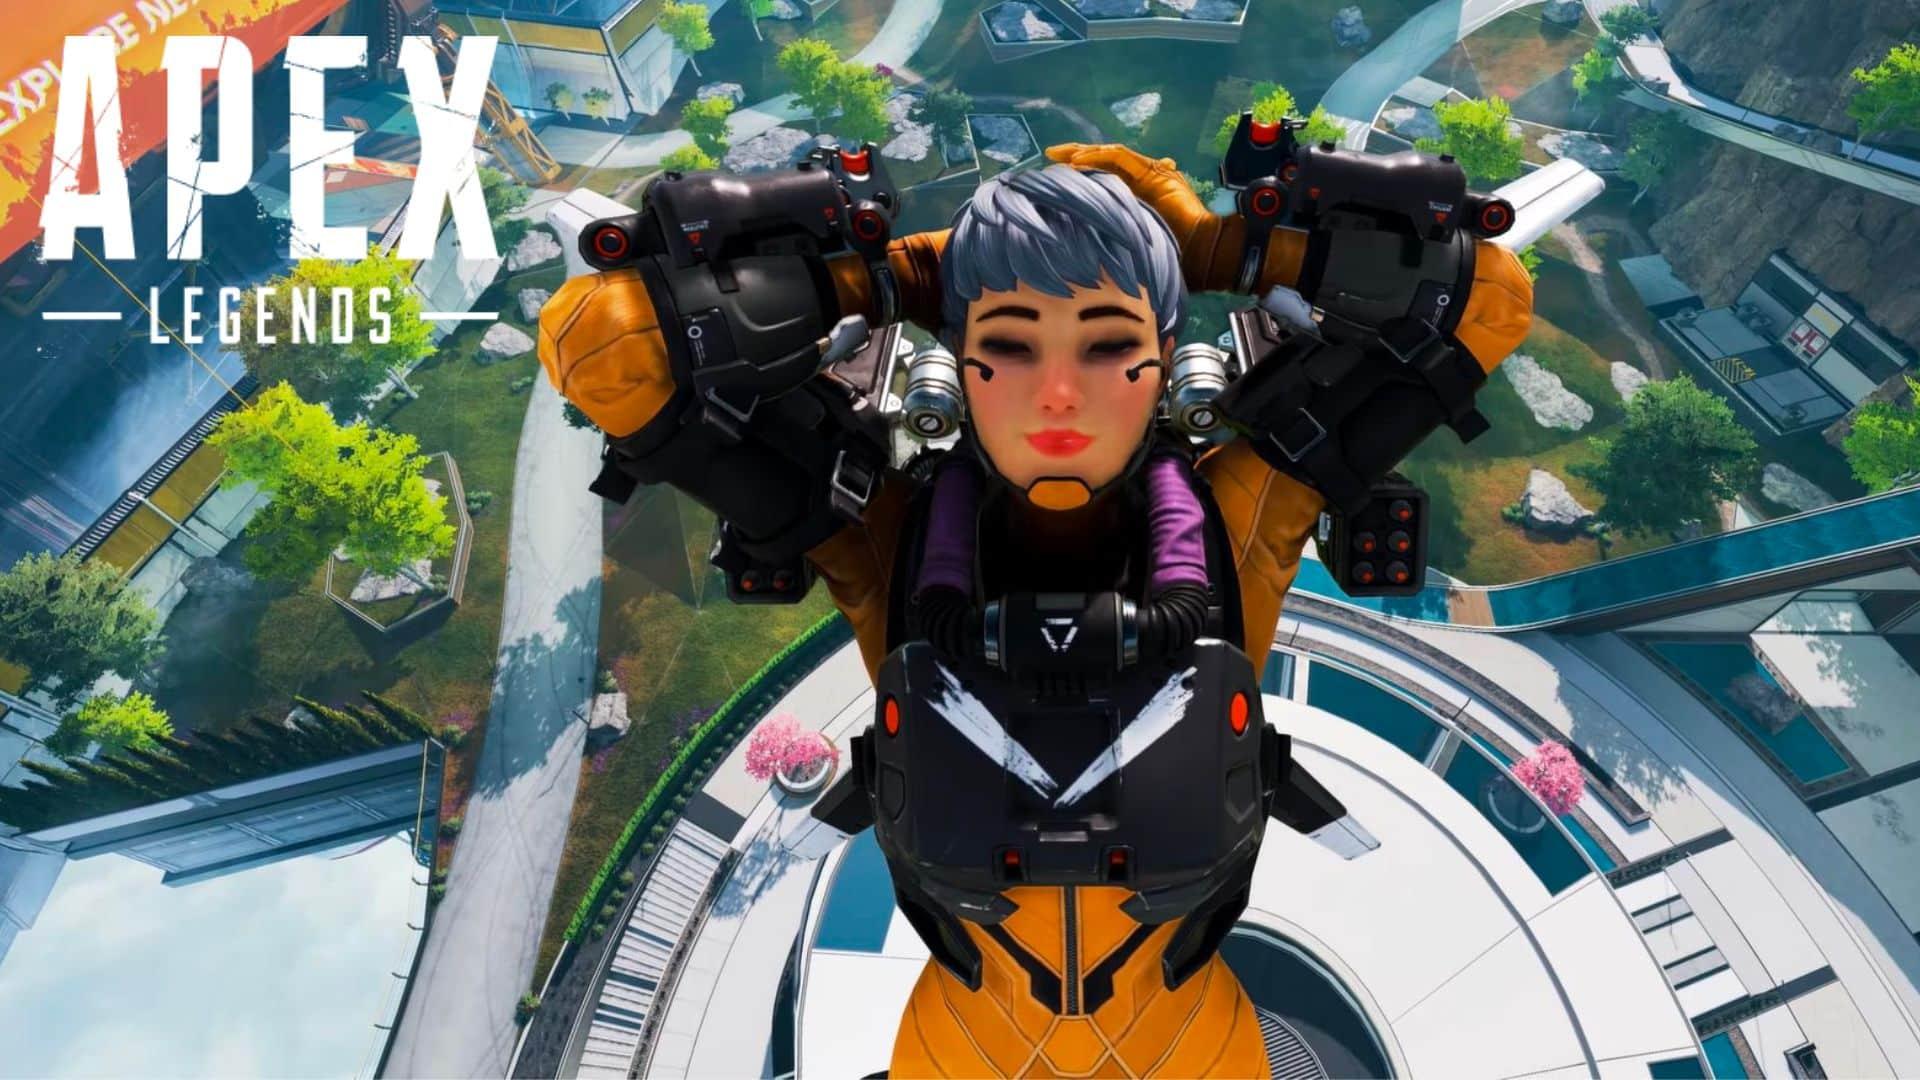 Valkyrie in Apex Legends floating in mid air